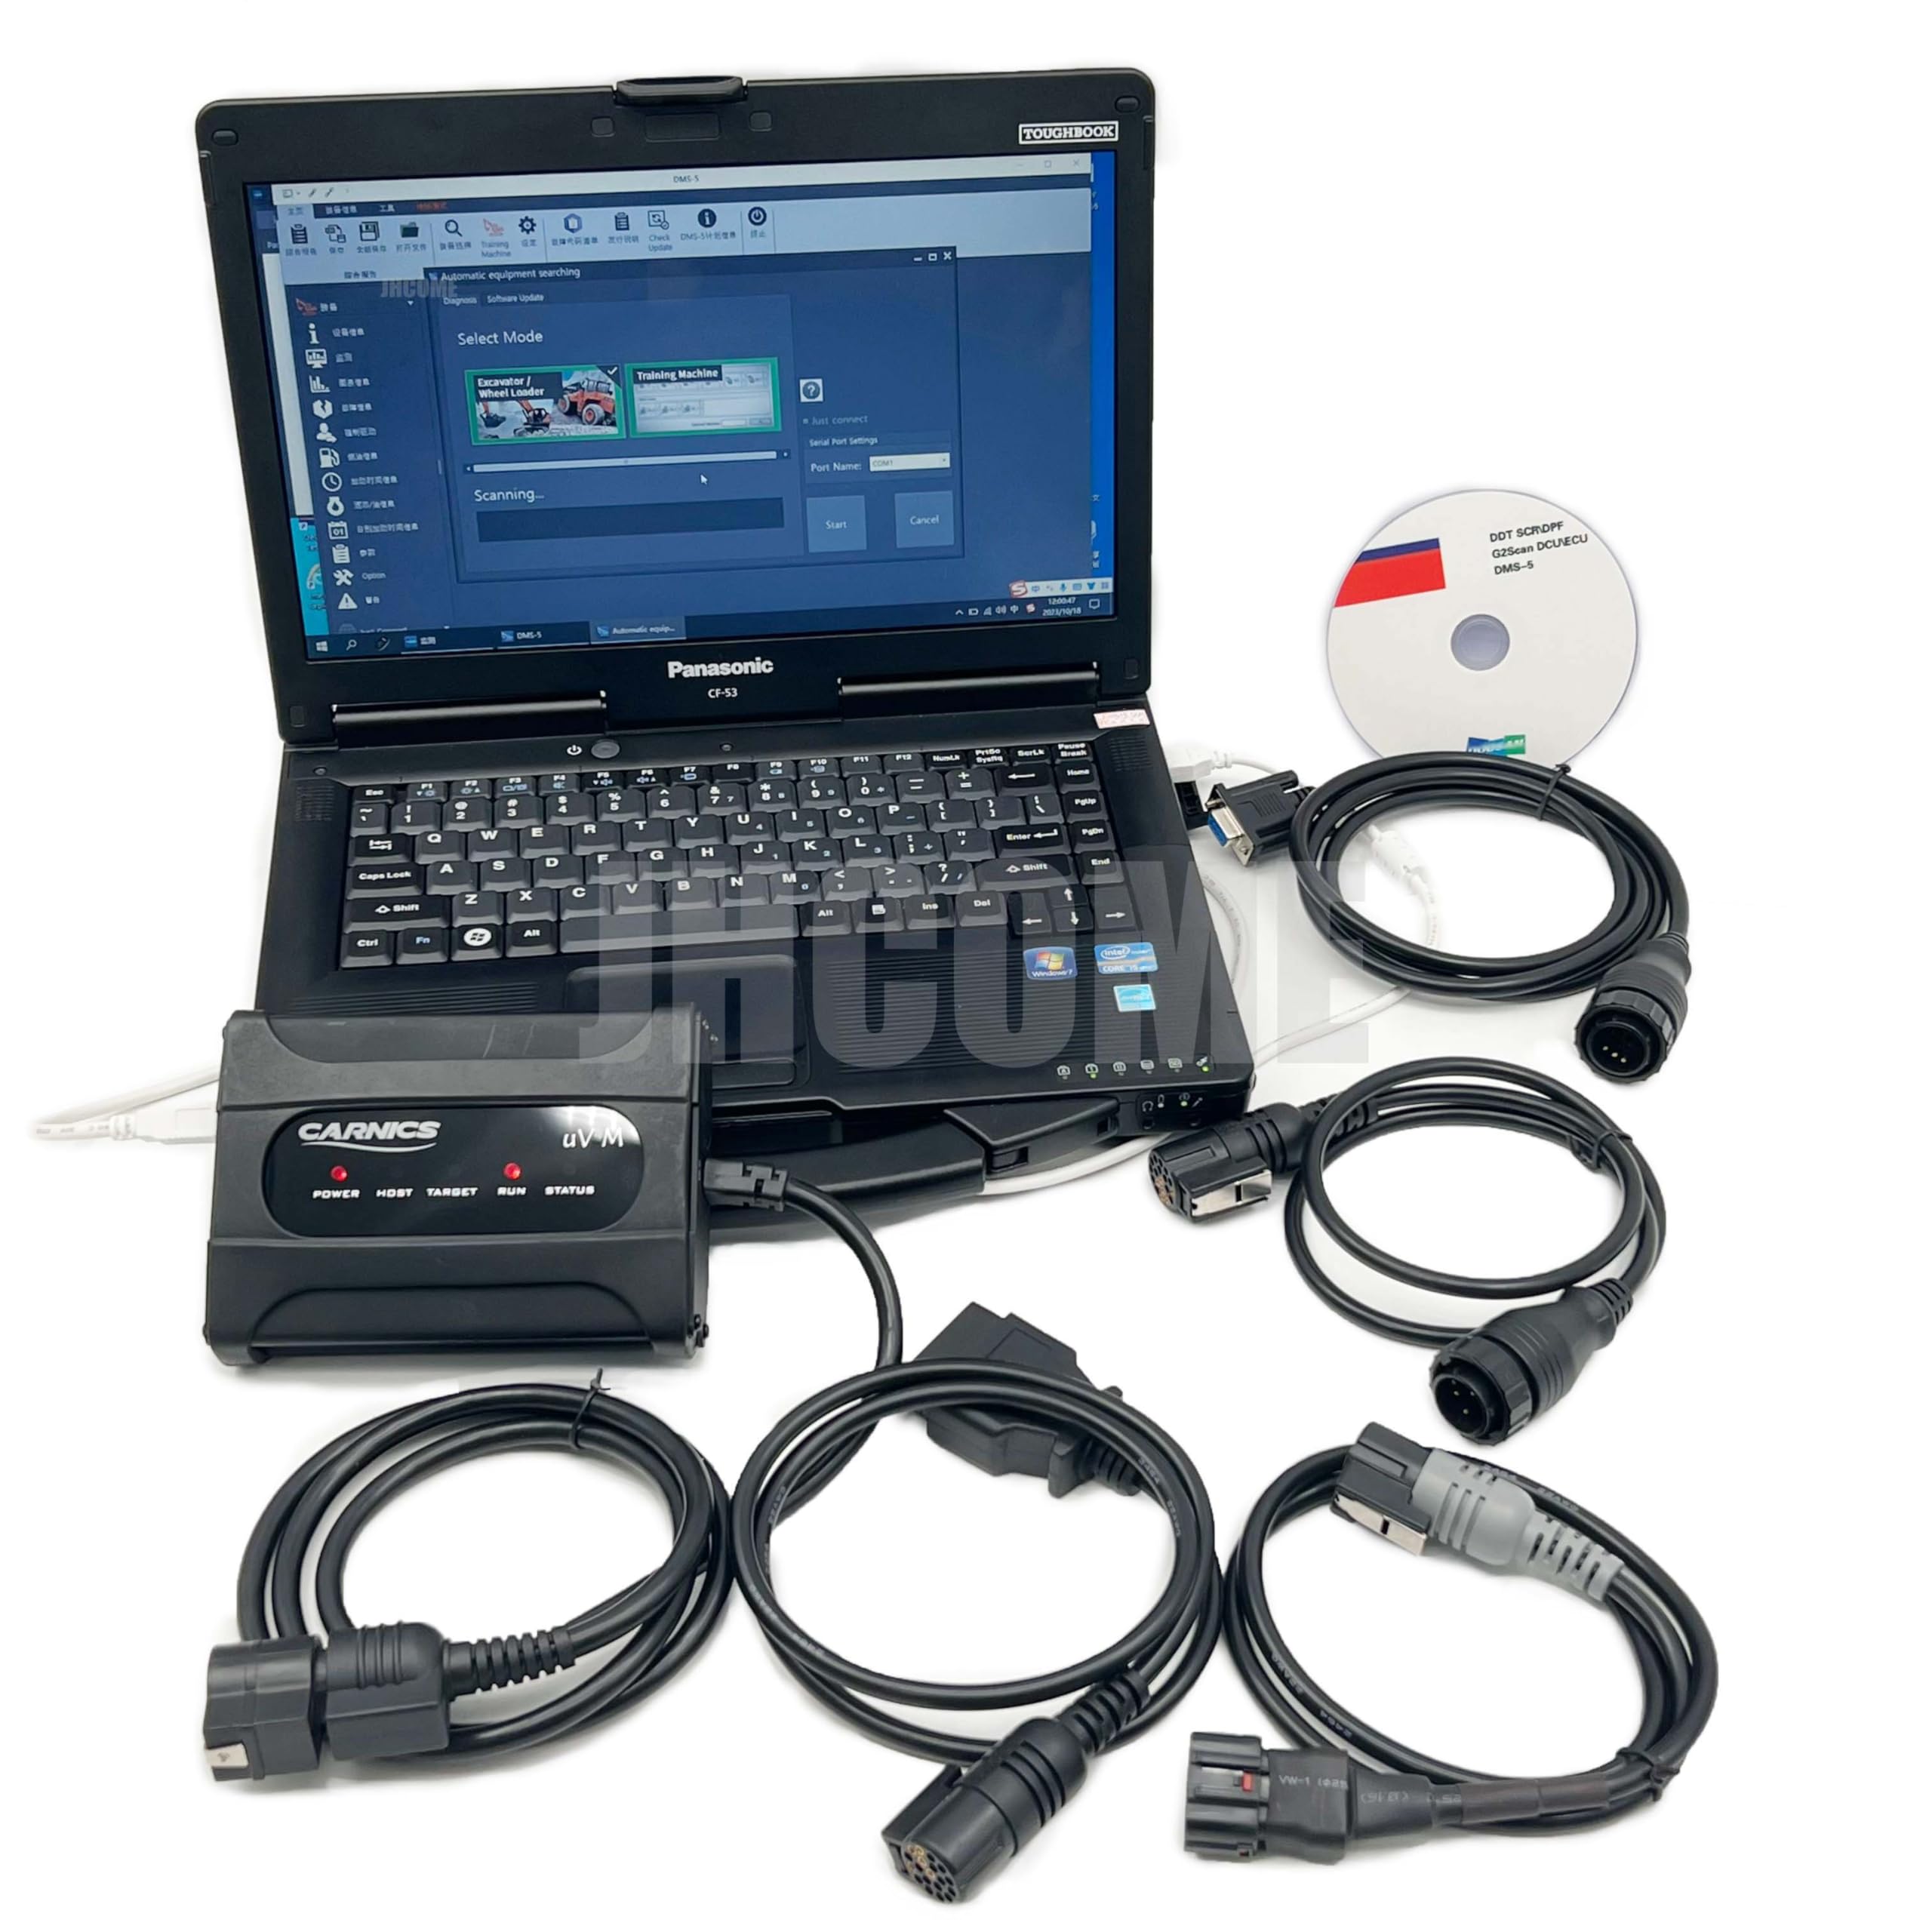 Diagnostic software interface